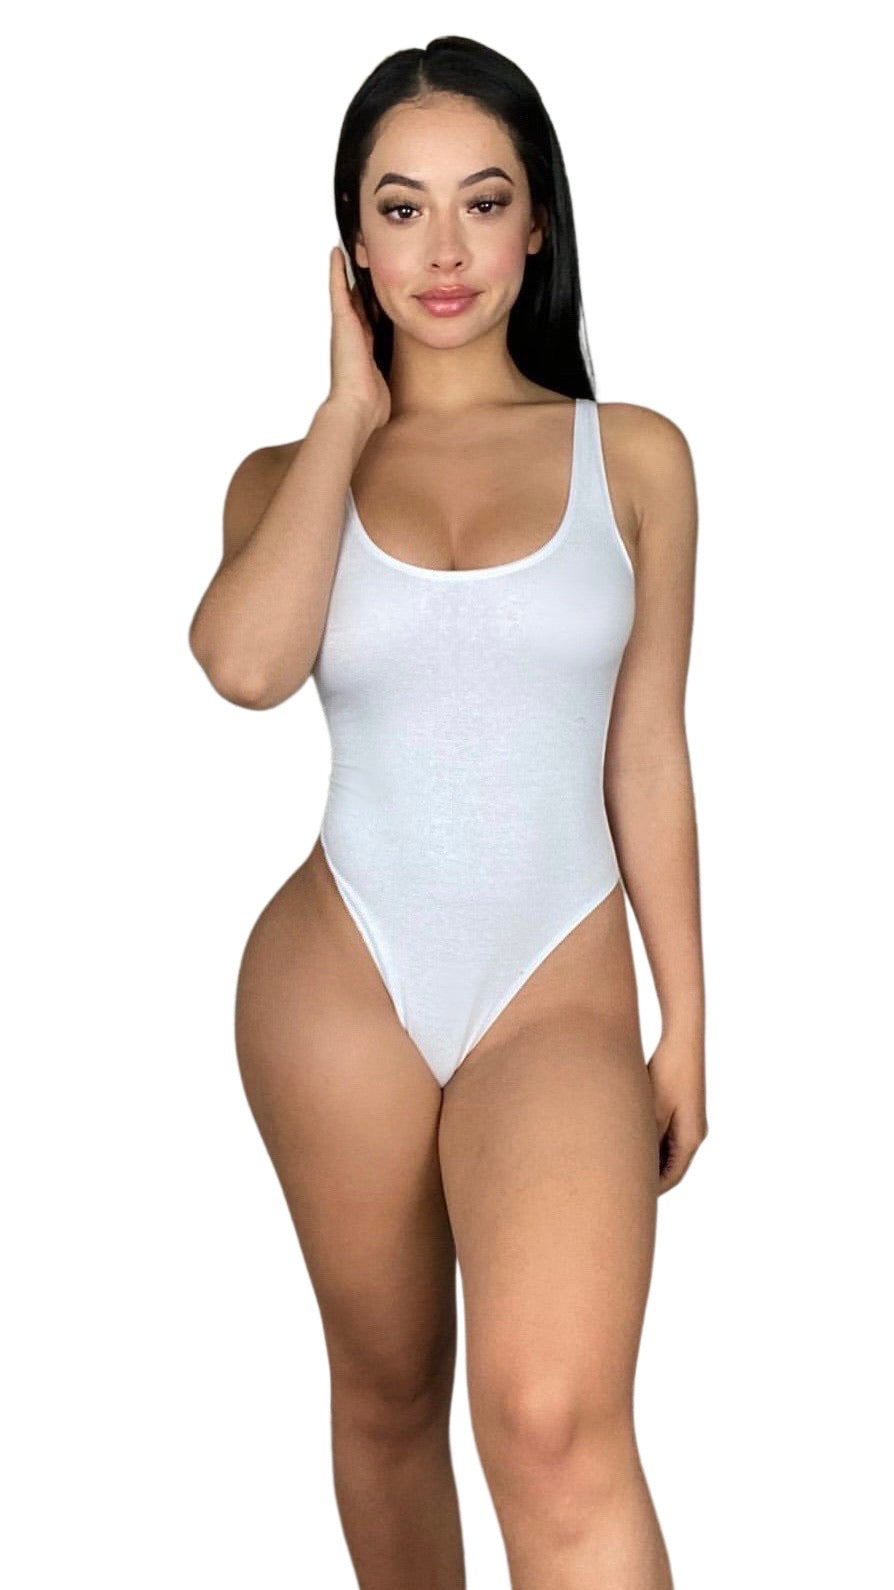 Snatched Bodysuit - White